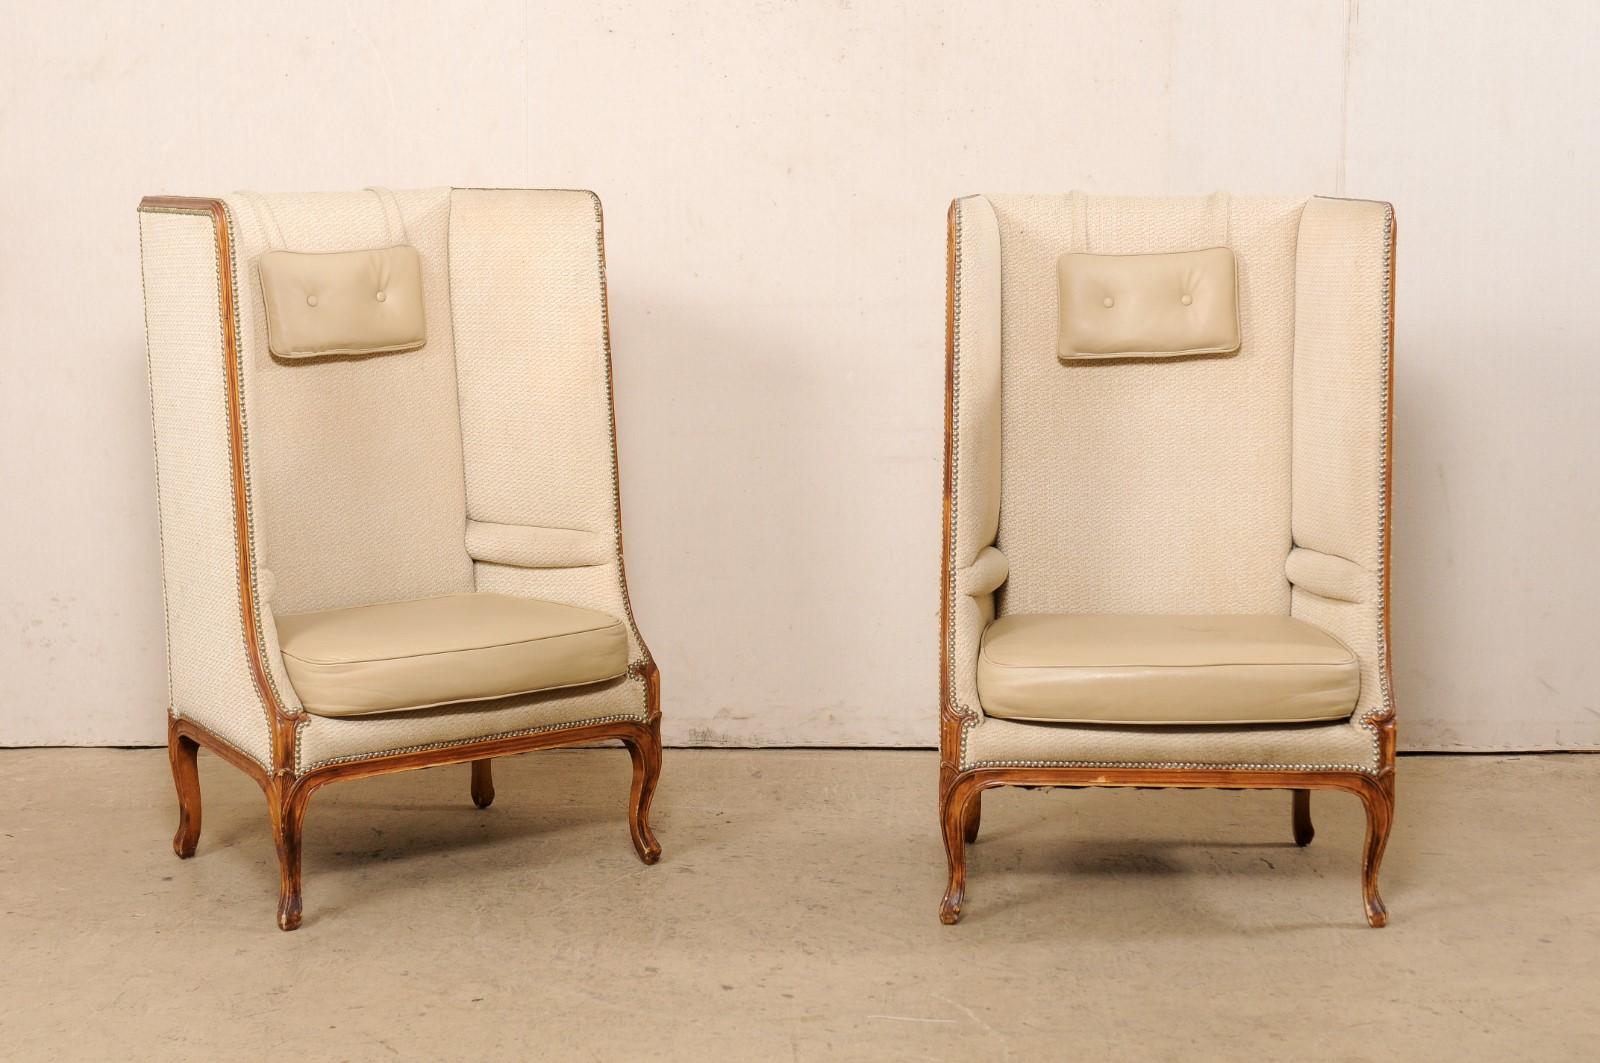 A fabulous pair of high wingback upholstered chairs, by American creator/manufacturer Niermann Weeks, created for (and originally from) the Ritz Carlton in Palm Beach, Florida. This pair of chairs each have tall rectangular-shaped backs (over 4 feet